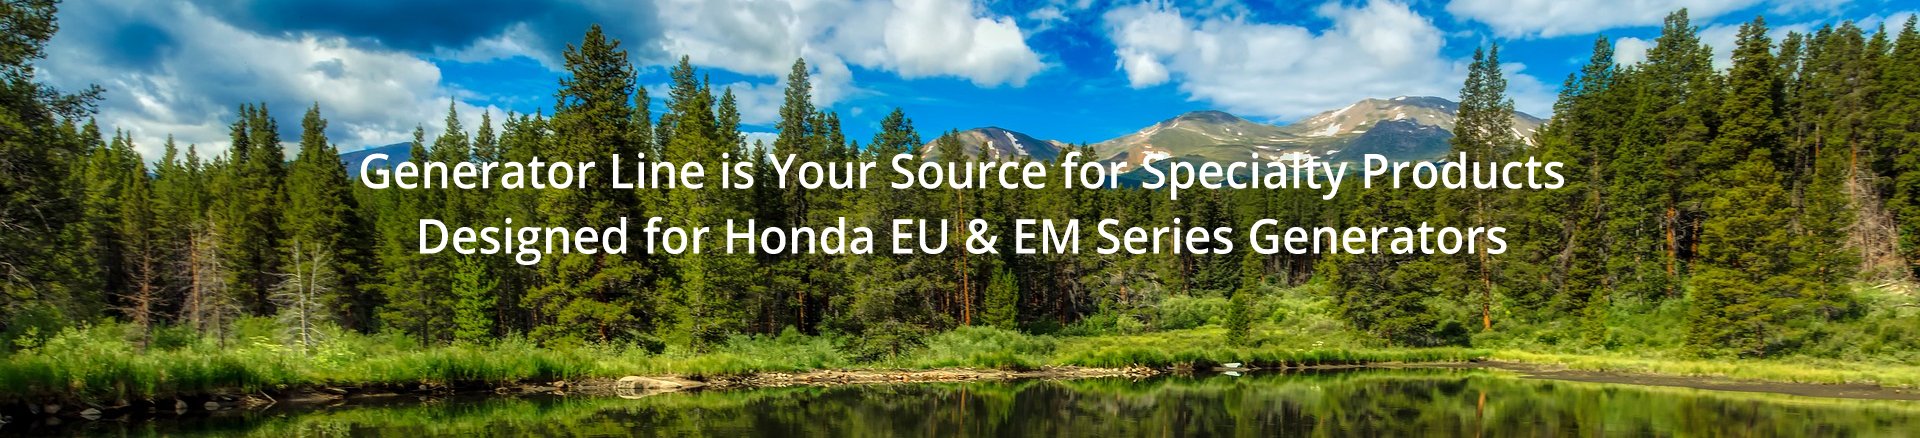 Generator Line is Your Source for Specialty Products Designed for Honda EU Generator Series.